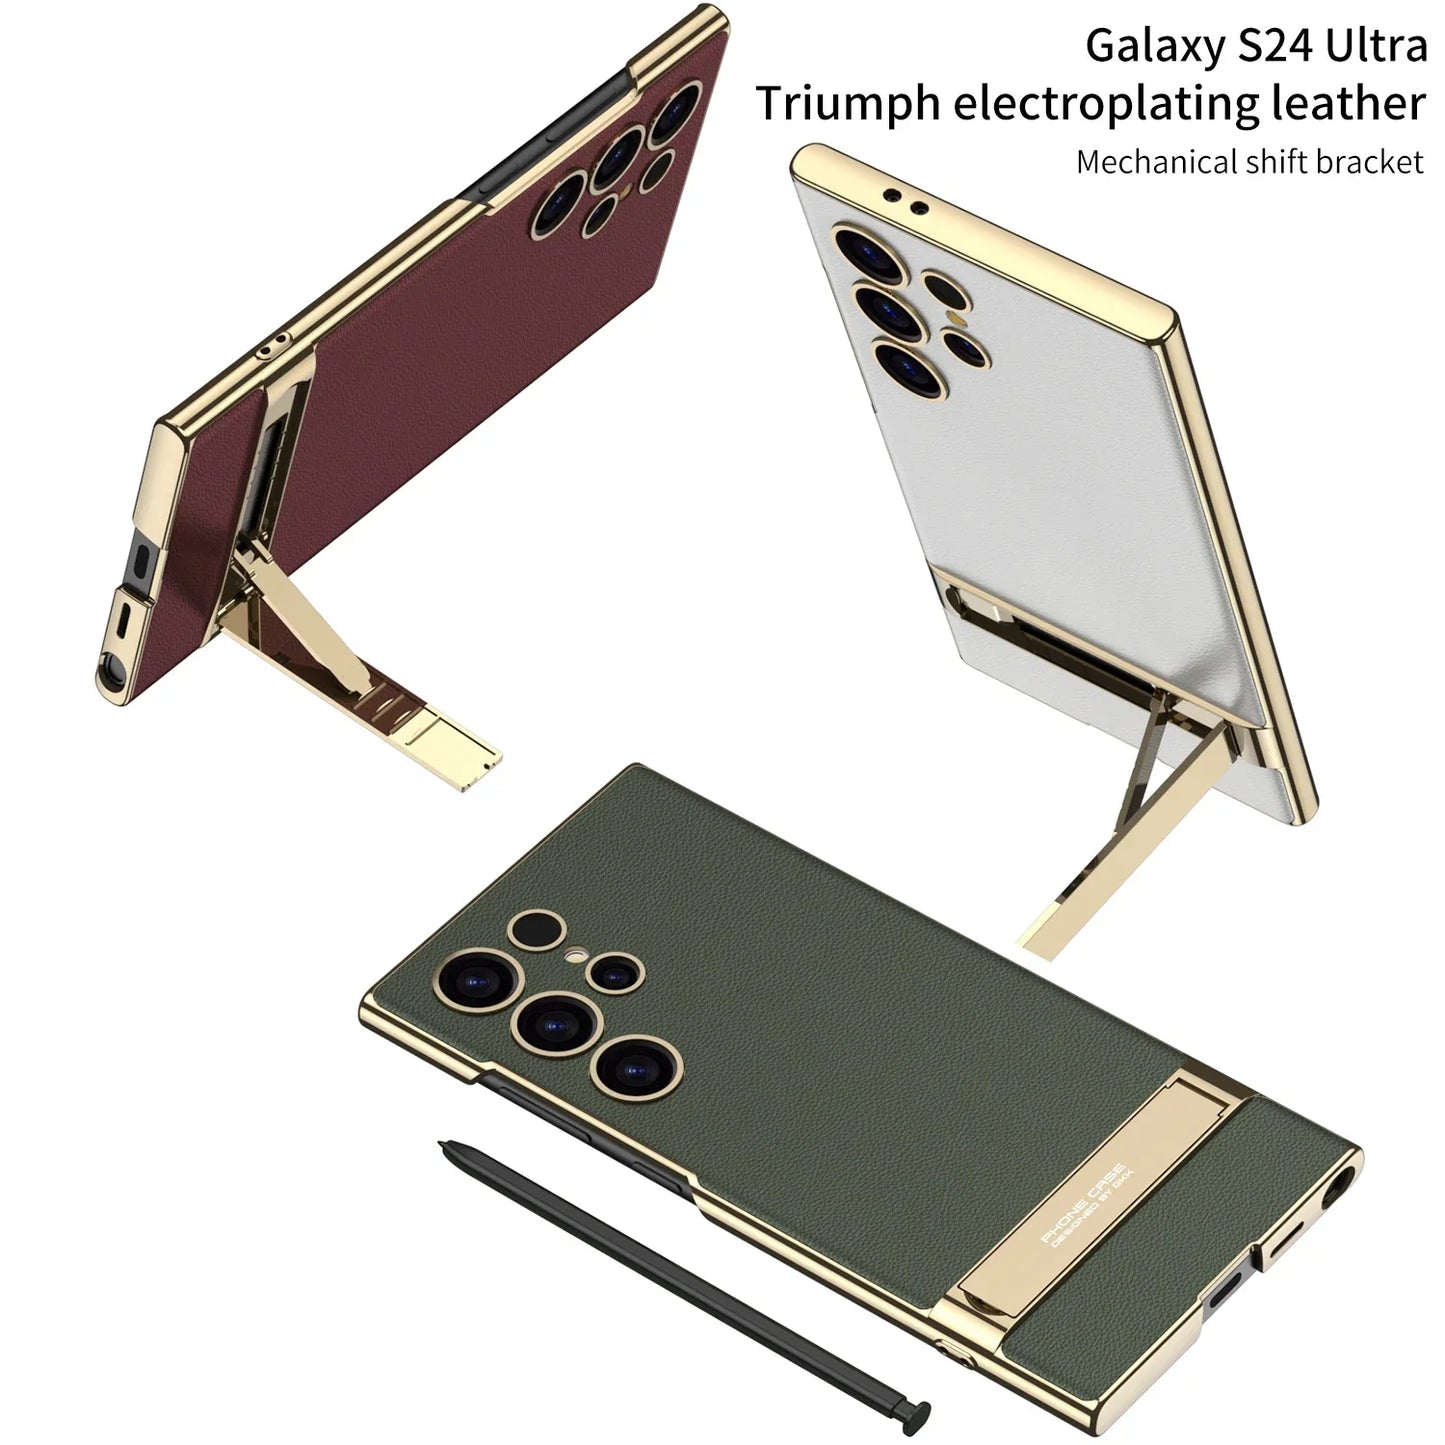 Galaxy S24 Ultra Shockproof Triumph Electroplating Leather Stand Case